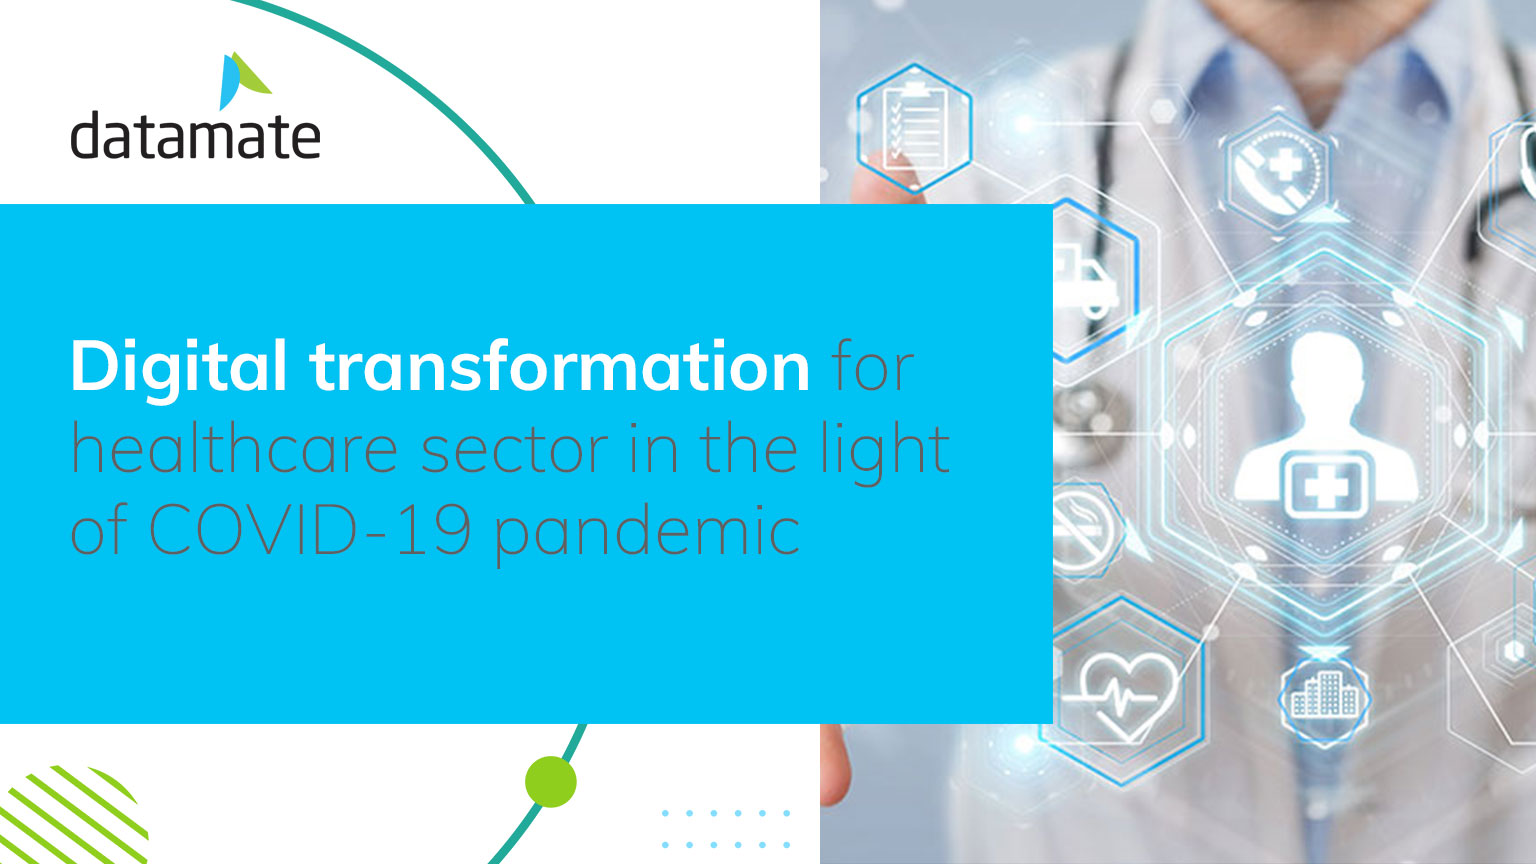 Digital transformation for healthcare sector in the light of COVID-19 pandemic